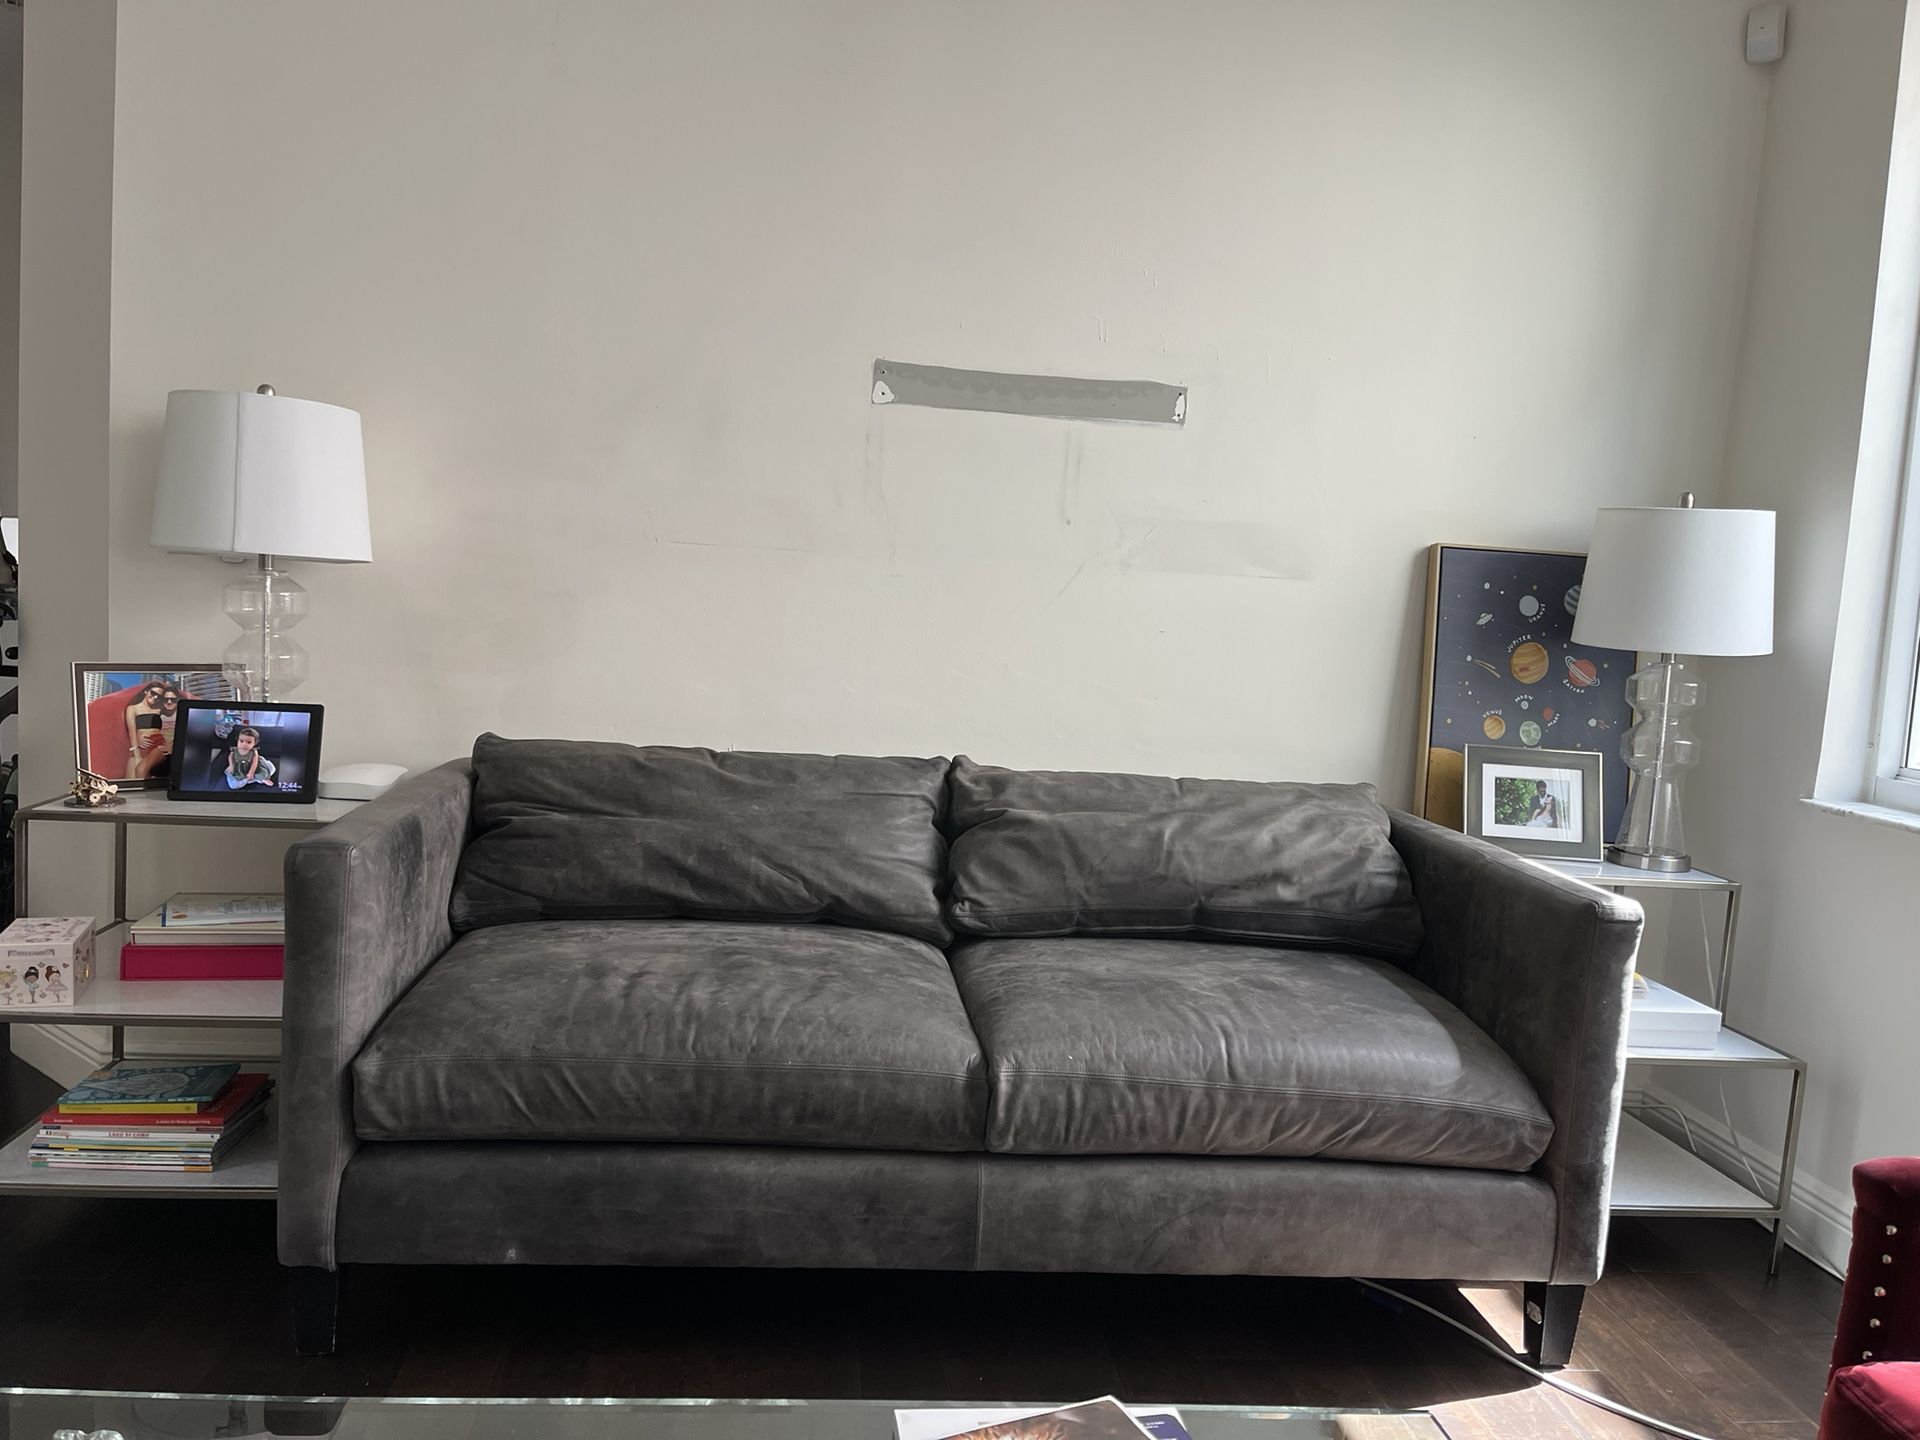 Grey Leather Rugged Style Couch